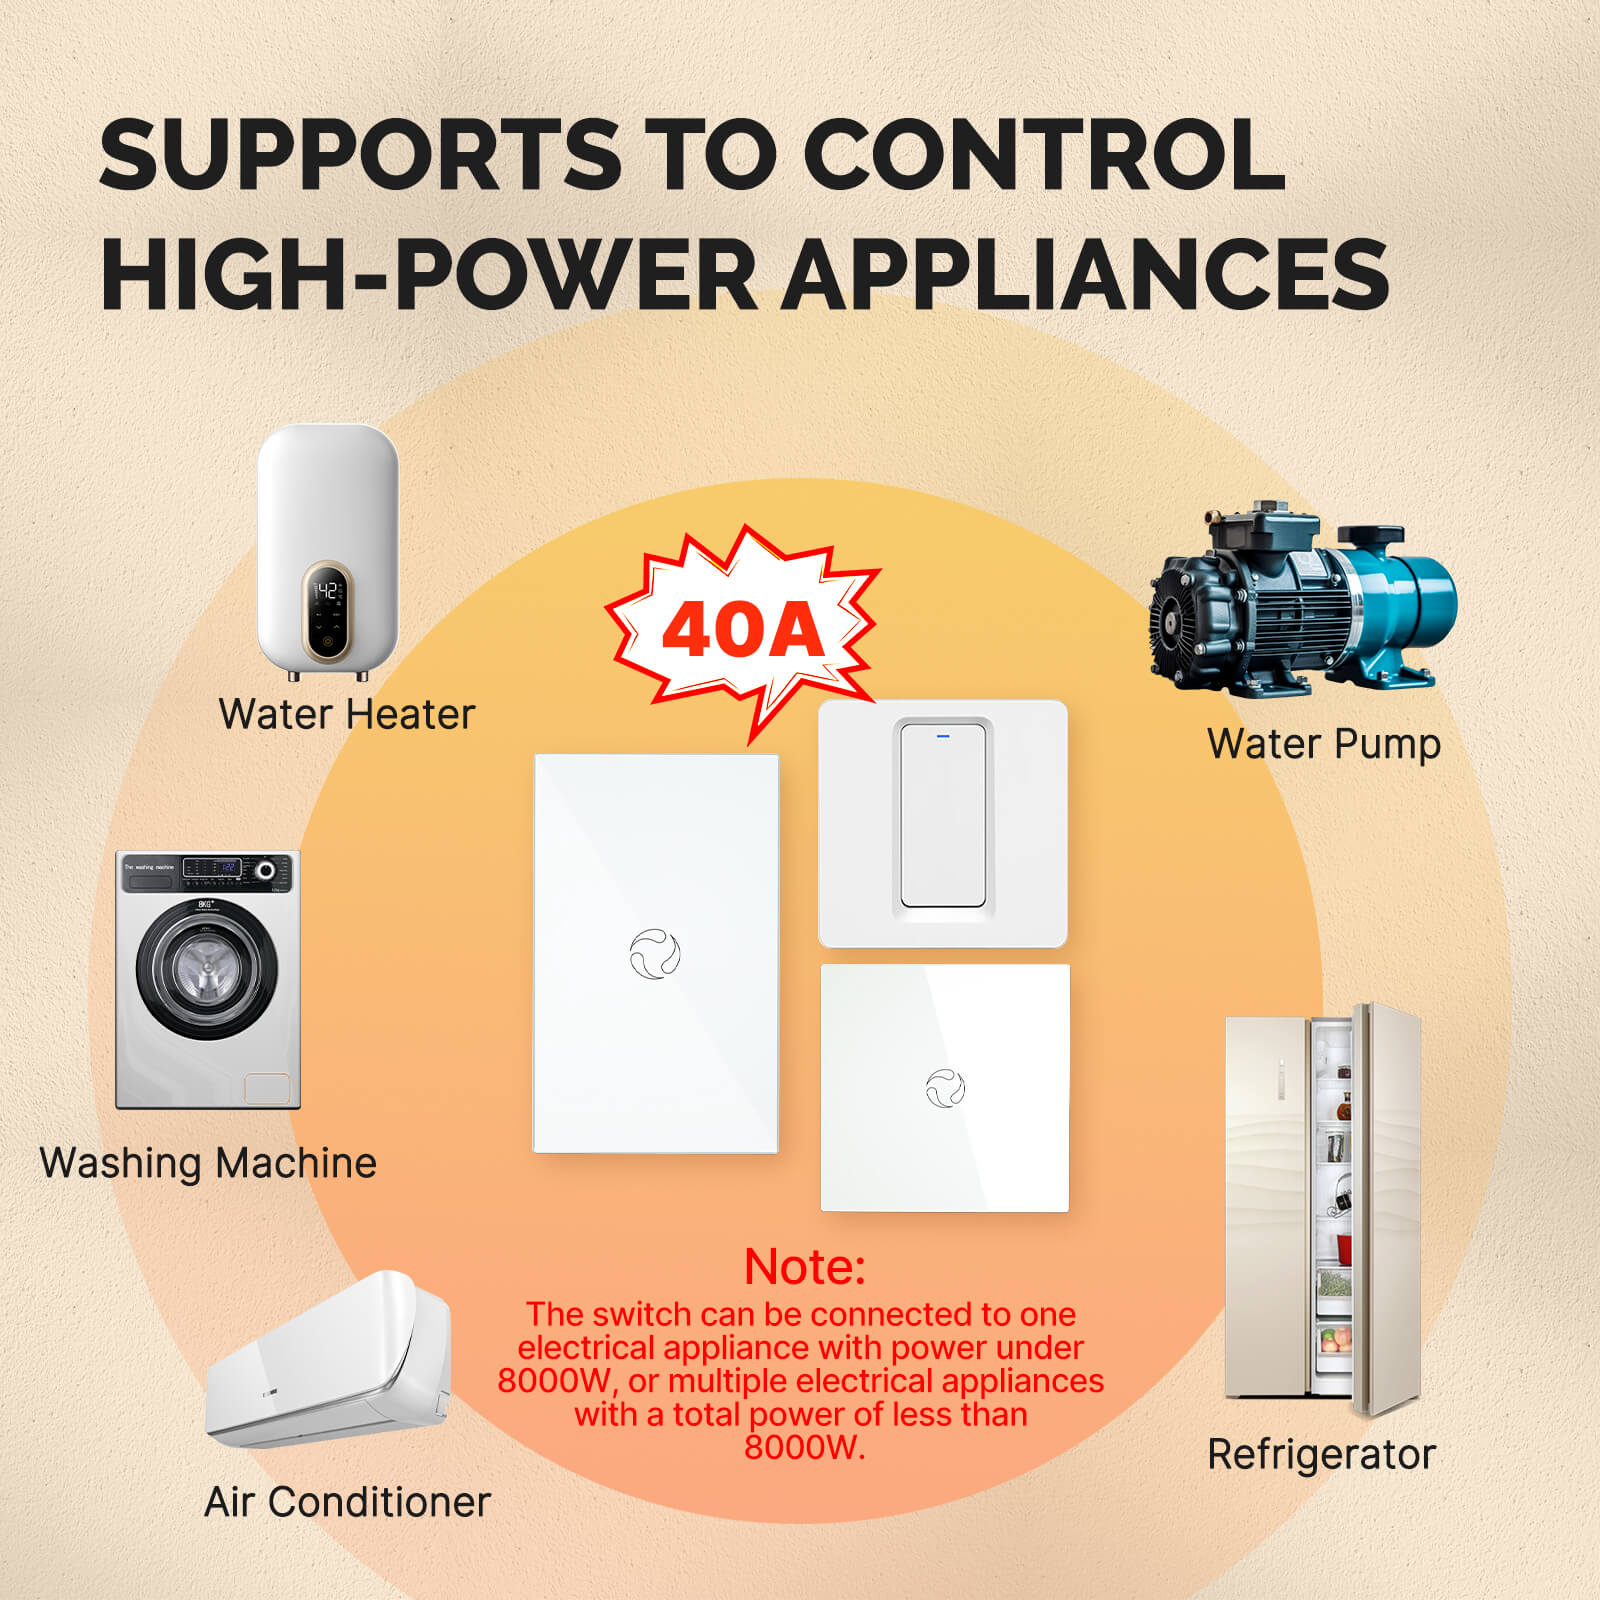 SUPPORTS TO CONTROLHIGH-POWER APPLIANCES - MOES